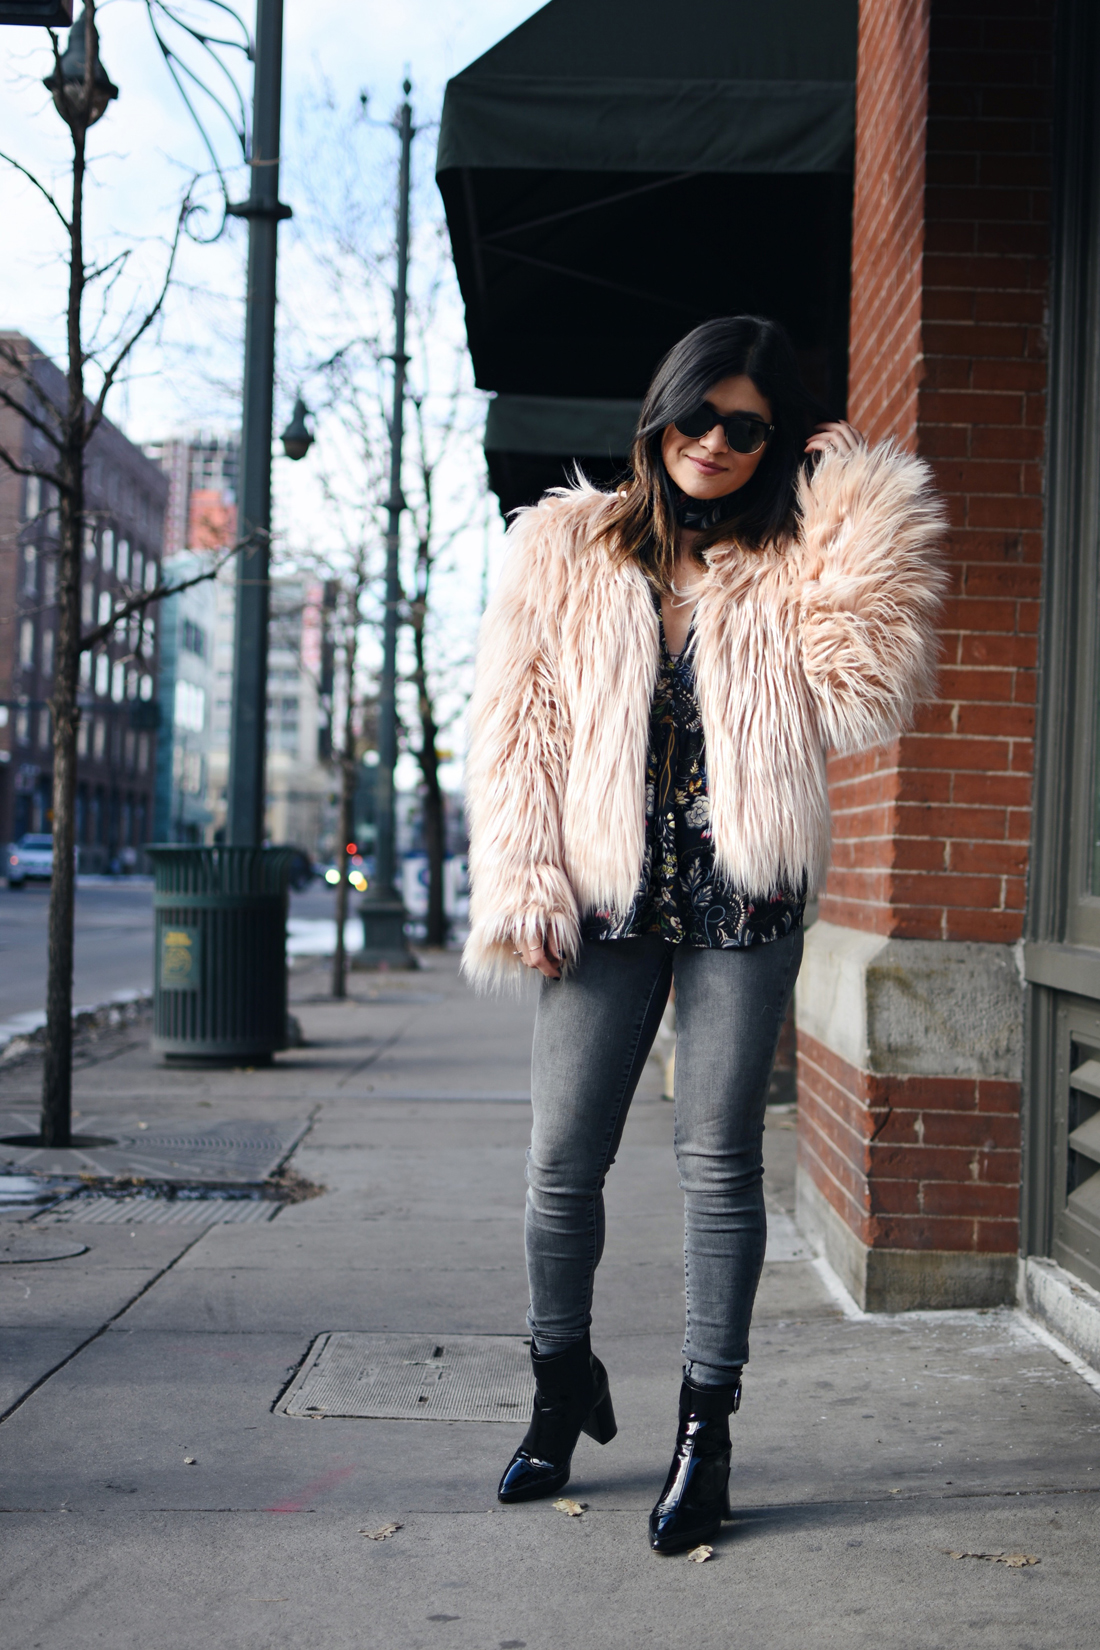 Carolina Hellal of Chic Talk wearing a floral top, furry pink coat, Madewell jeans, and h&m black booties